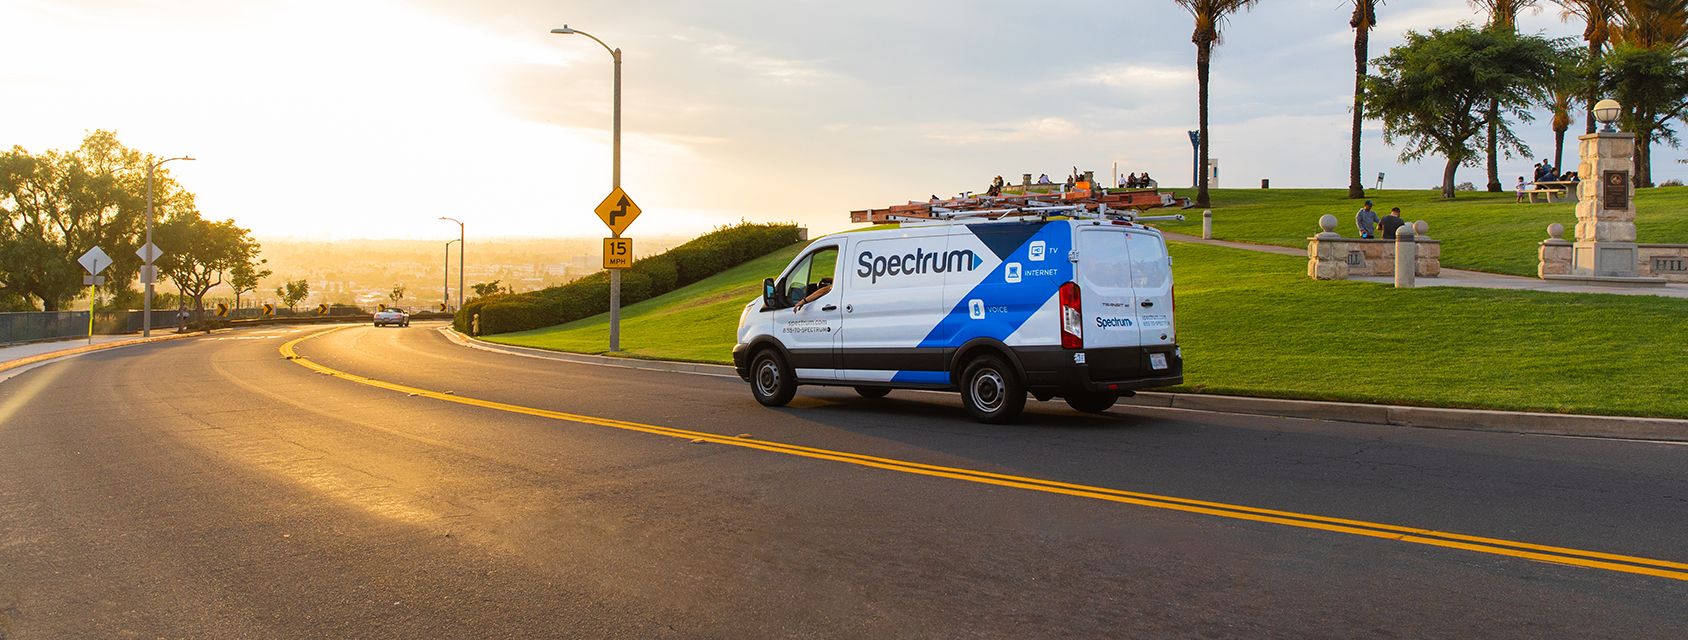 Spectrum van riding into the sunset on an open road